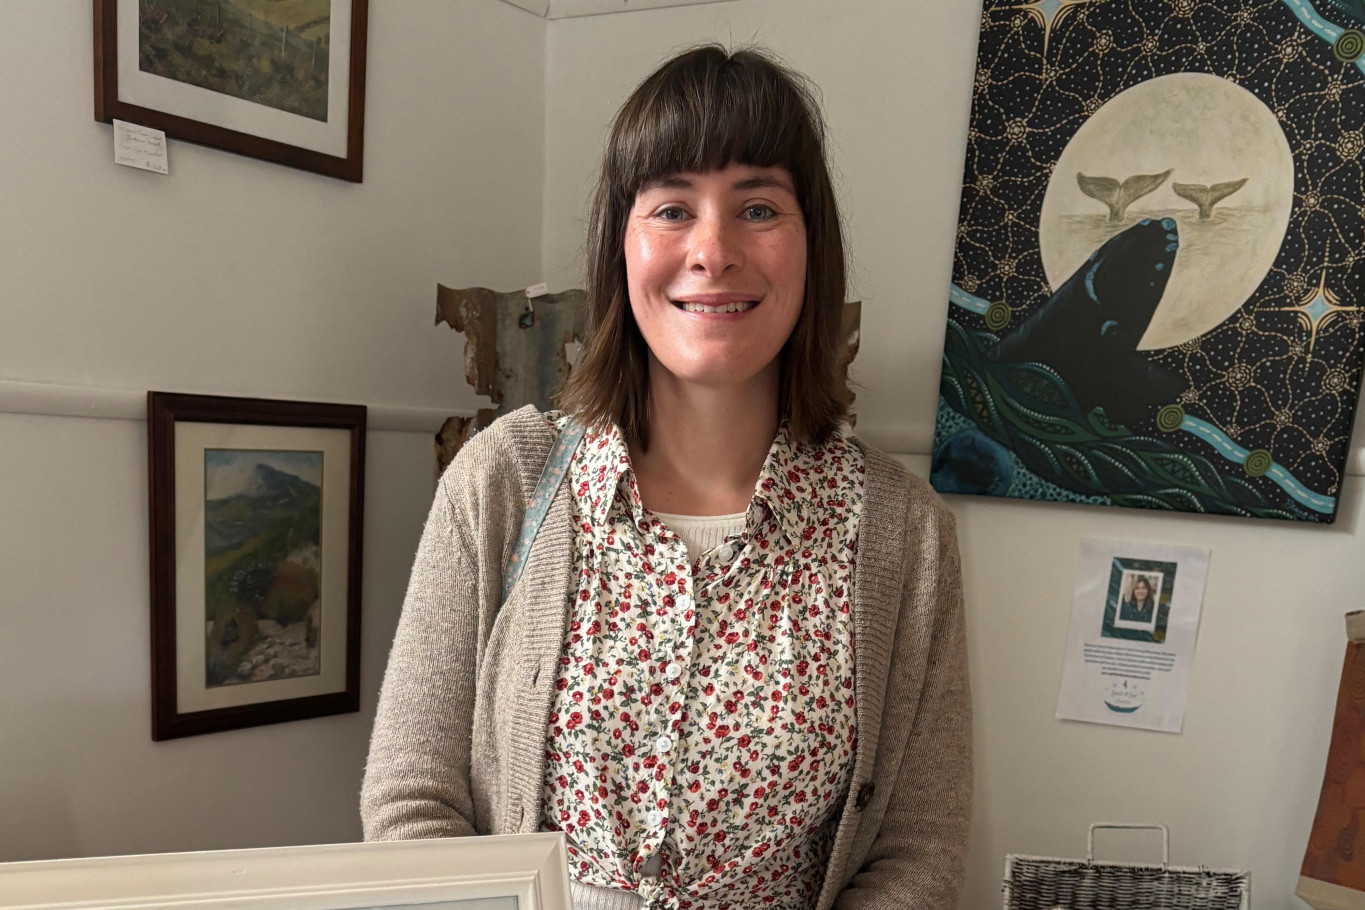 Creative: Local artist Emily Whiteside will be using her talents to complete pet portraits in a monthly session at the Cobden Visitor Information Centre and Art Gallery.